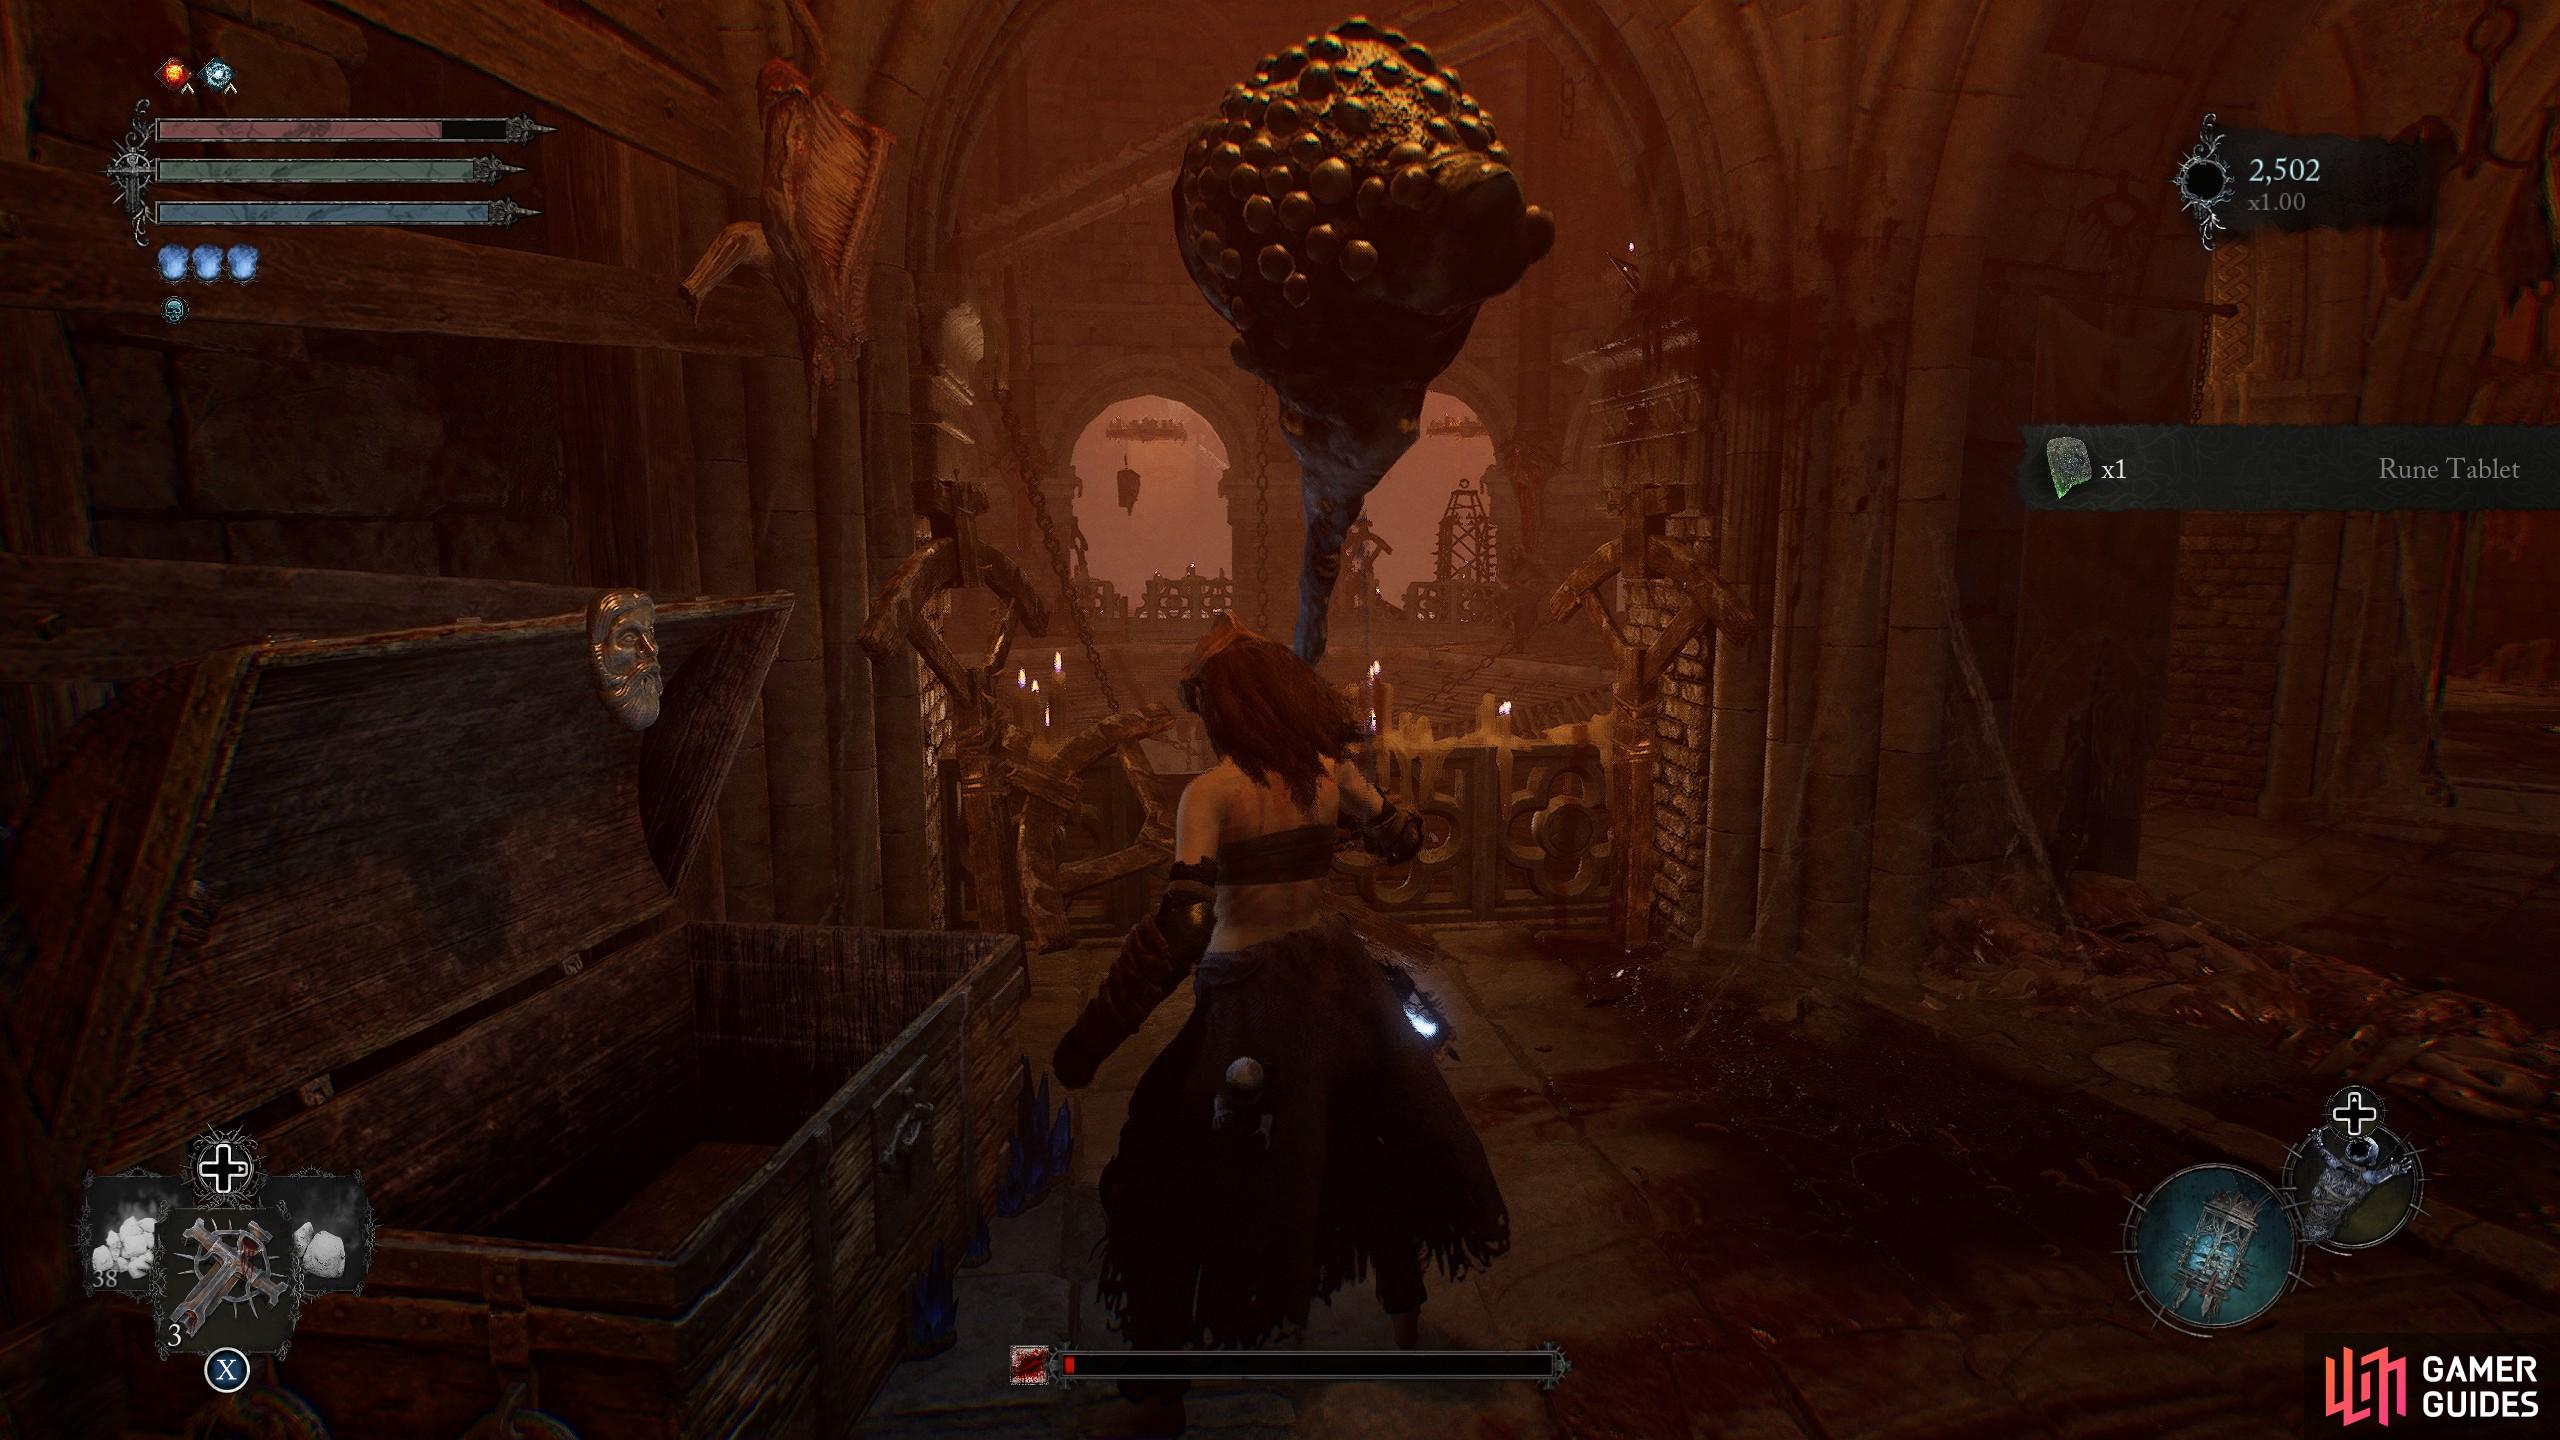 The final Rune tablet location in Lords of the Fallen is on the main level in the Tower of Penance.